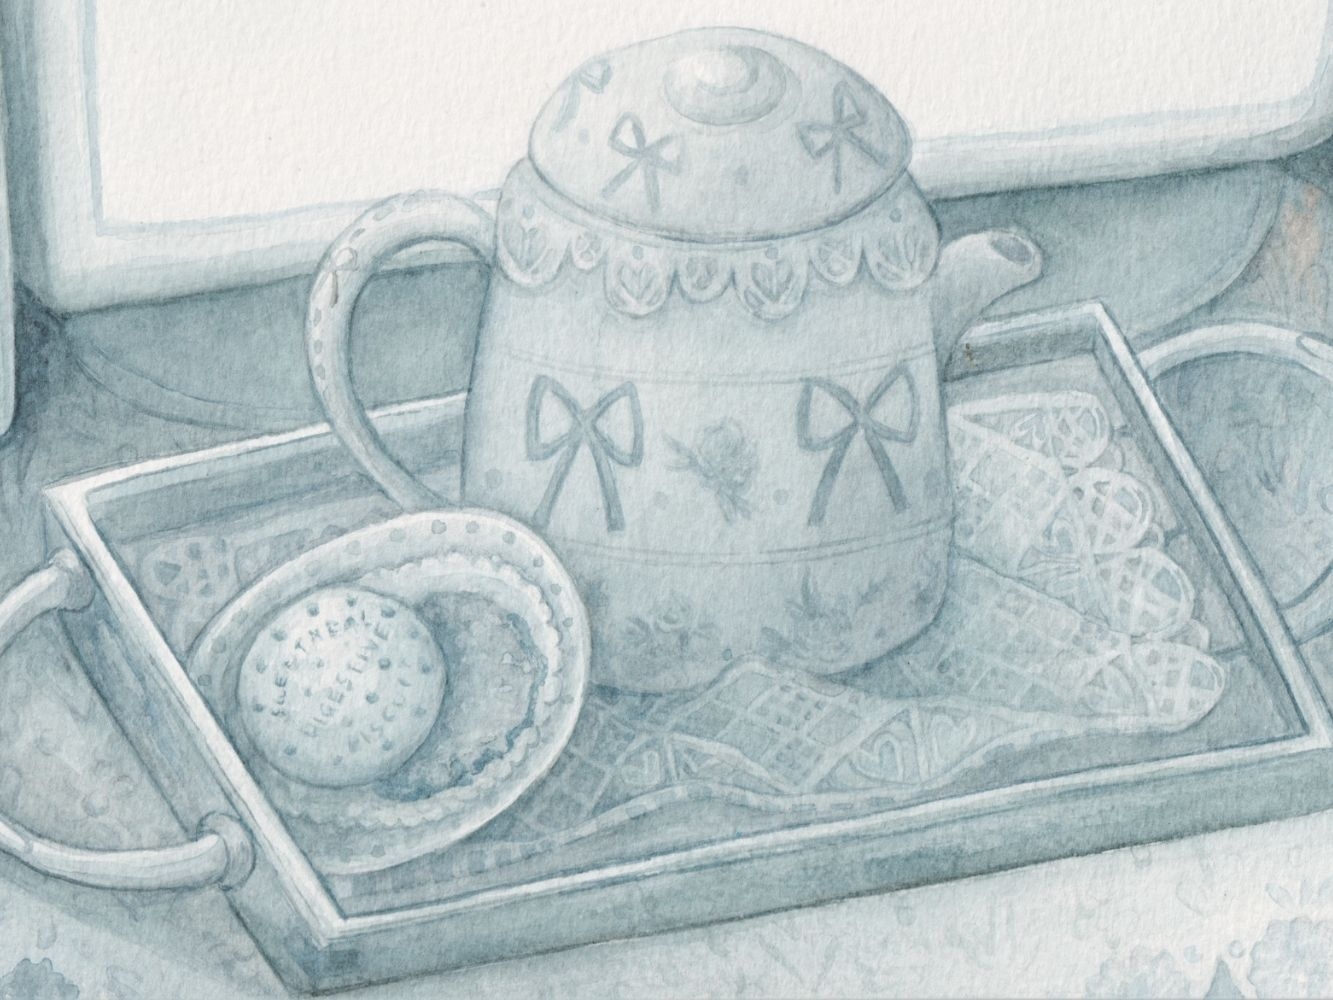 Painting of a decorated tea pot on a tray with a Digestive biscuit on a plate next to it